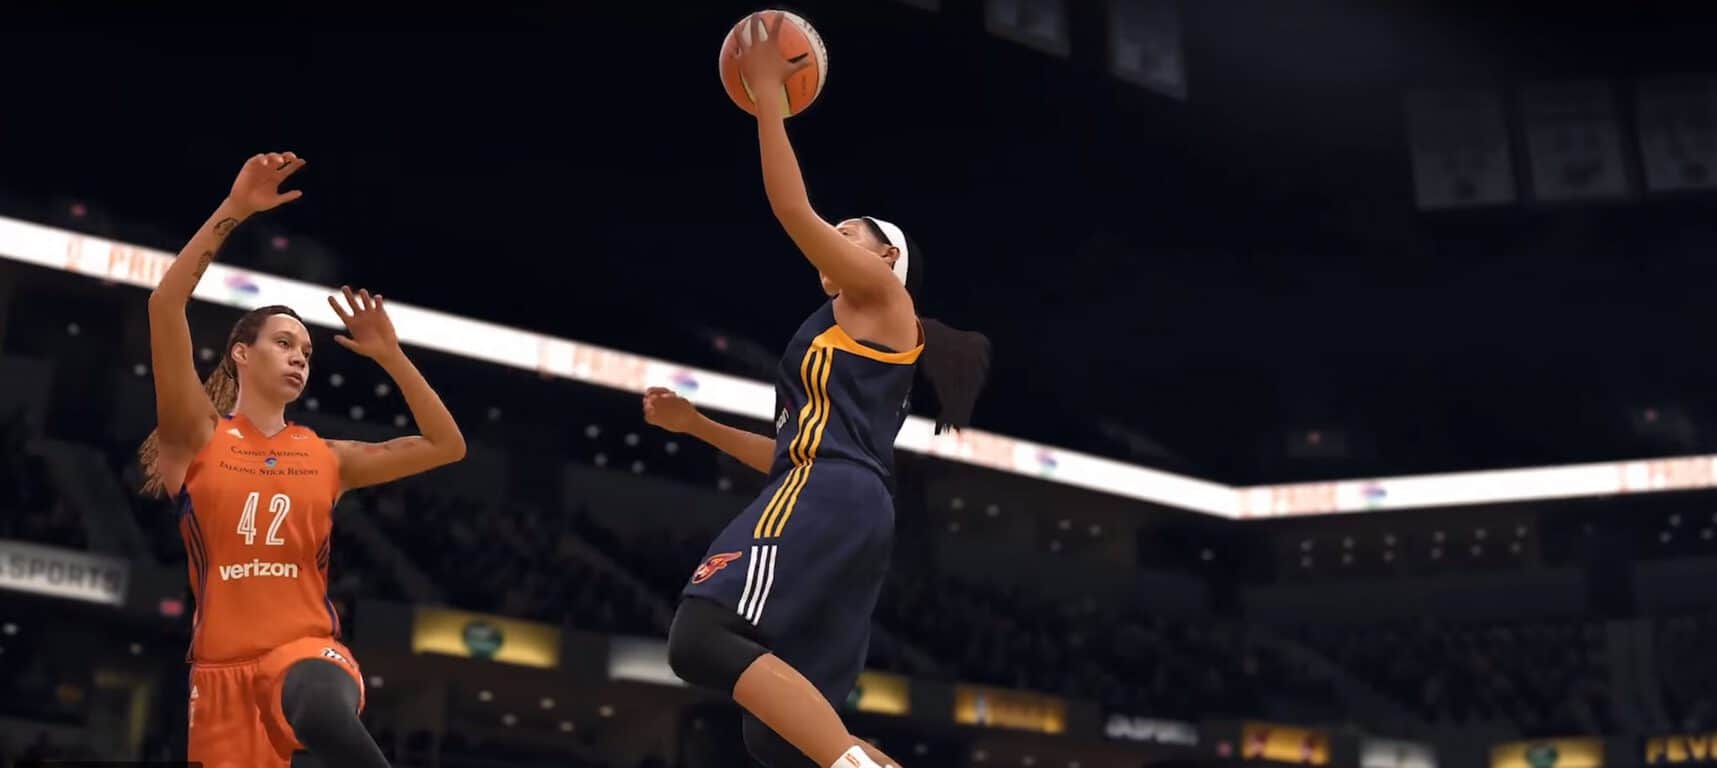 NBA Live 18 to include the WNBA for the first time - OnMSFT.com - August 3, 2017